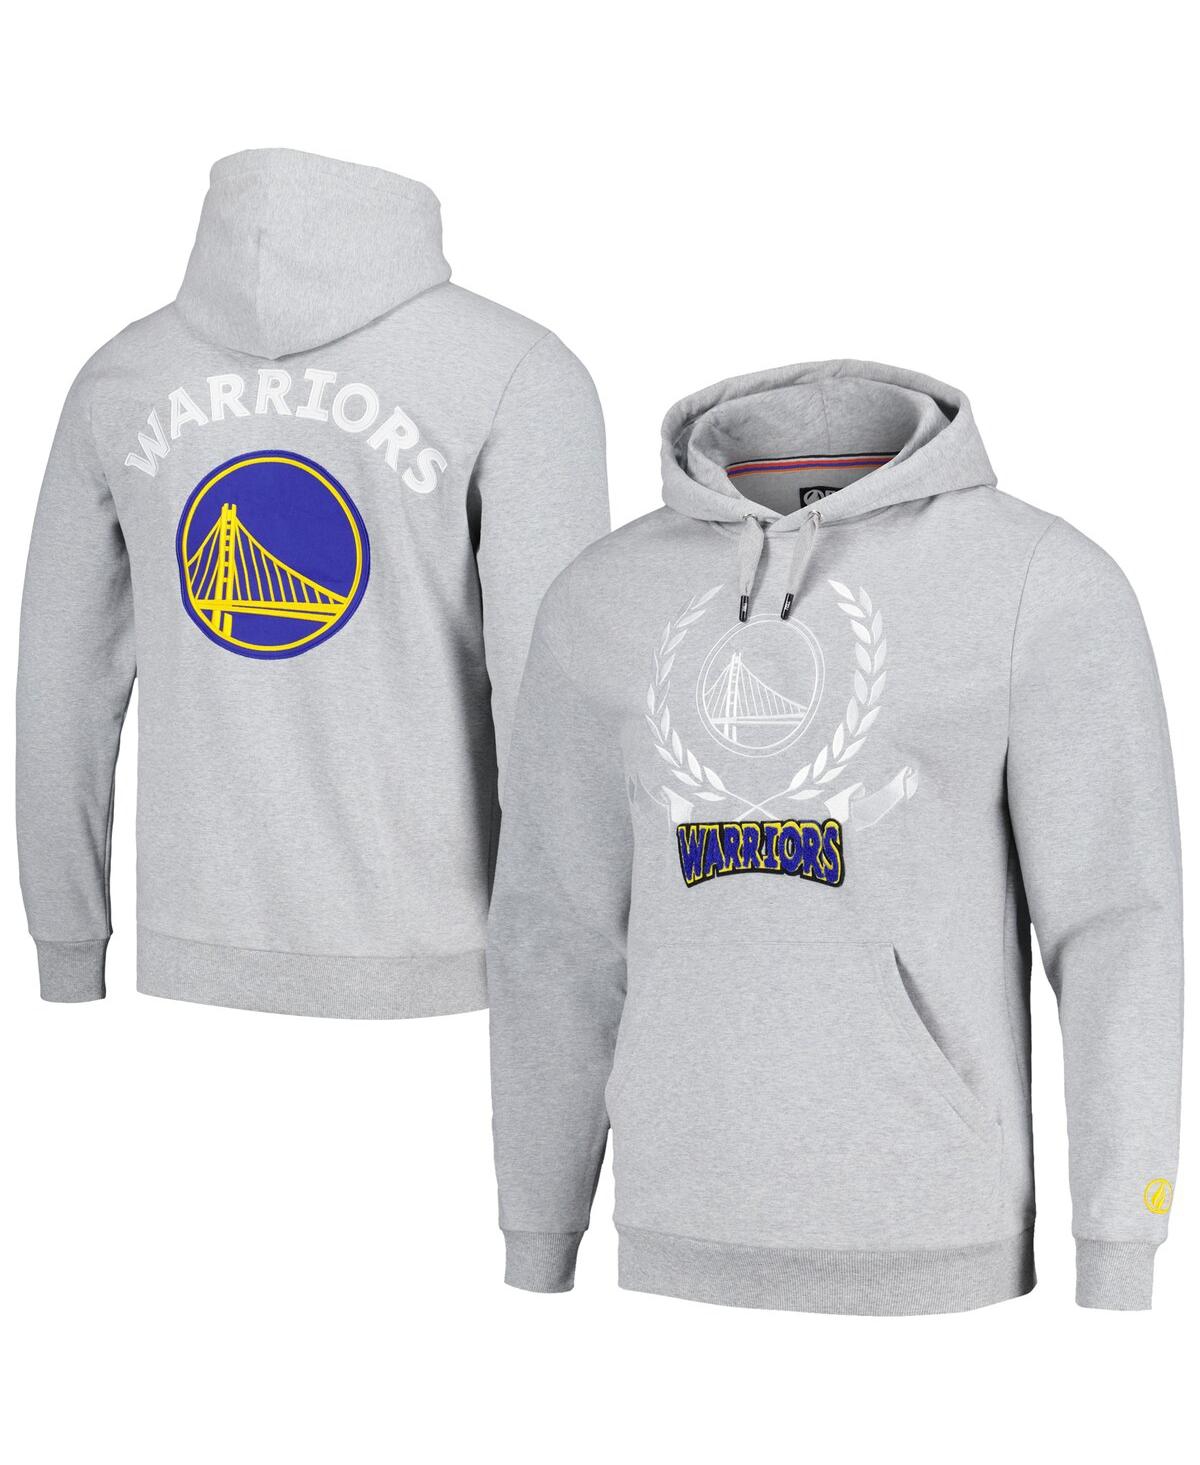 FISLL MEN'S AND WOMEN'S FISLL HEATHER GRAY GOLDEN STATE WARRIORS HERITAGE CREST PULLOVER HOODIE